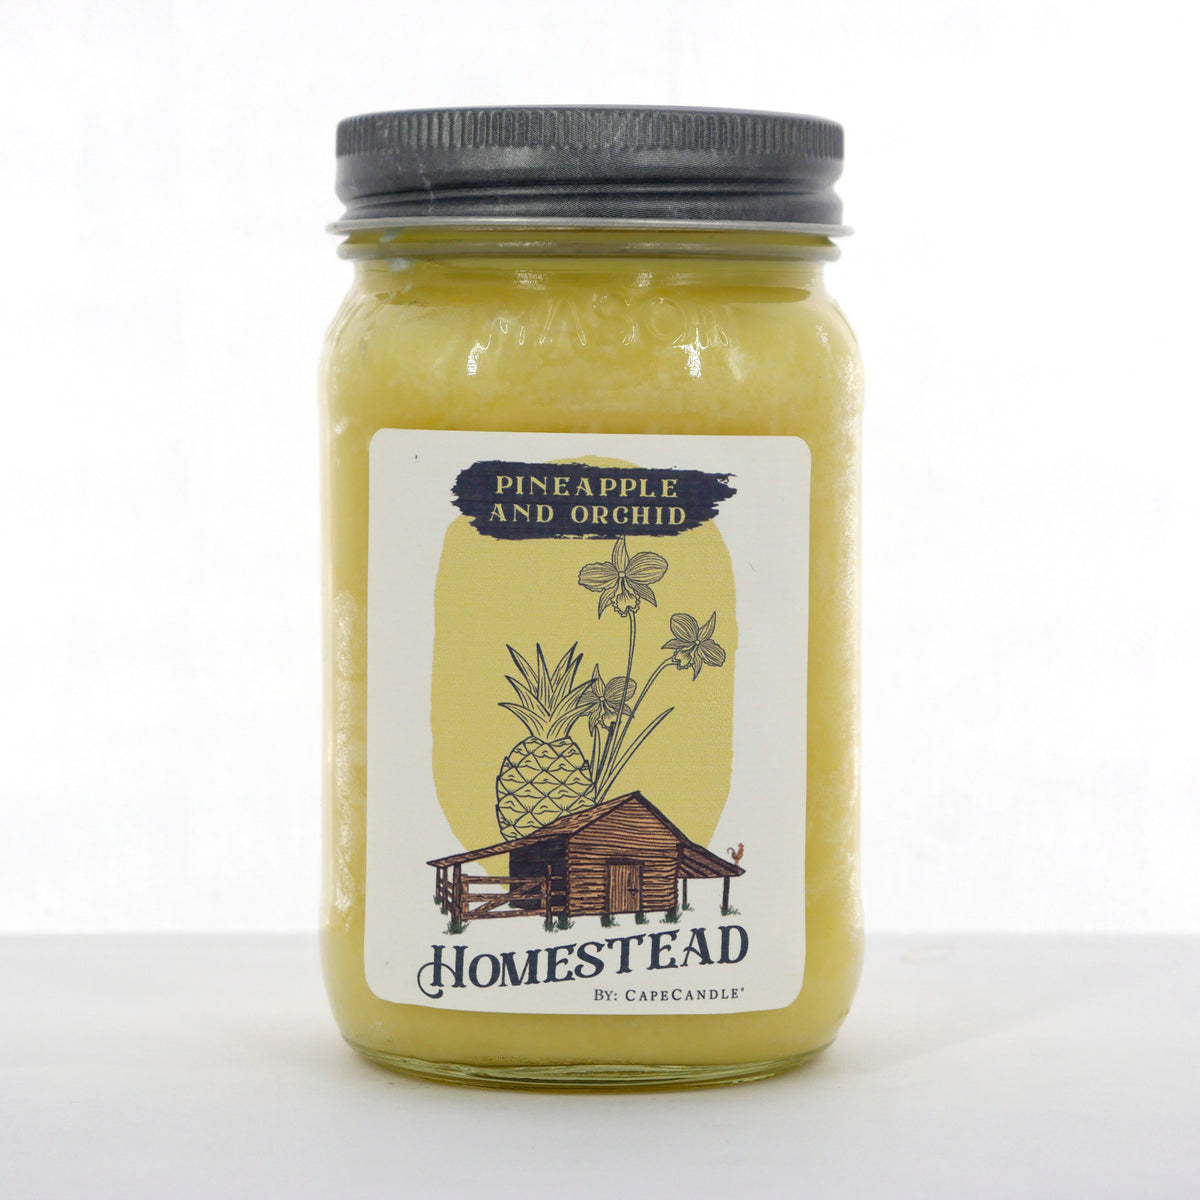 Pineapple and Orchid Soy Candle 16oz Homestead Mason Jar by Cape Candle